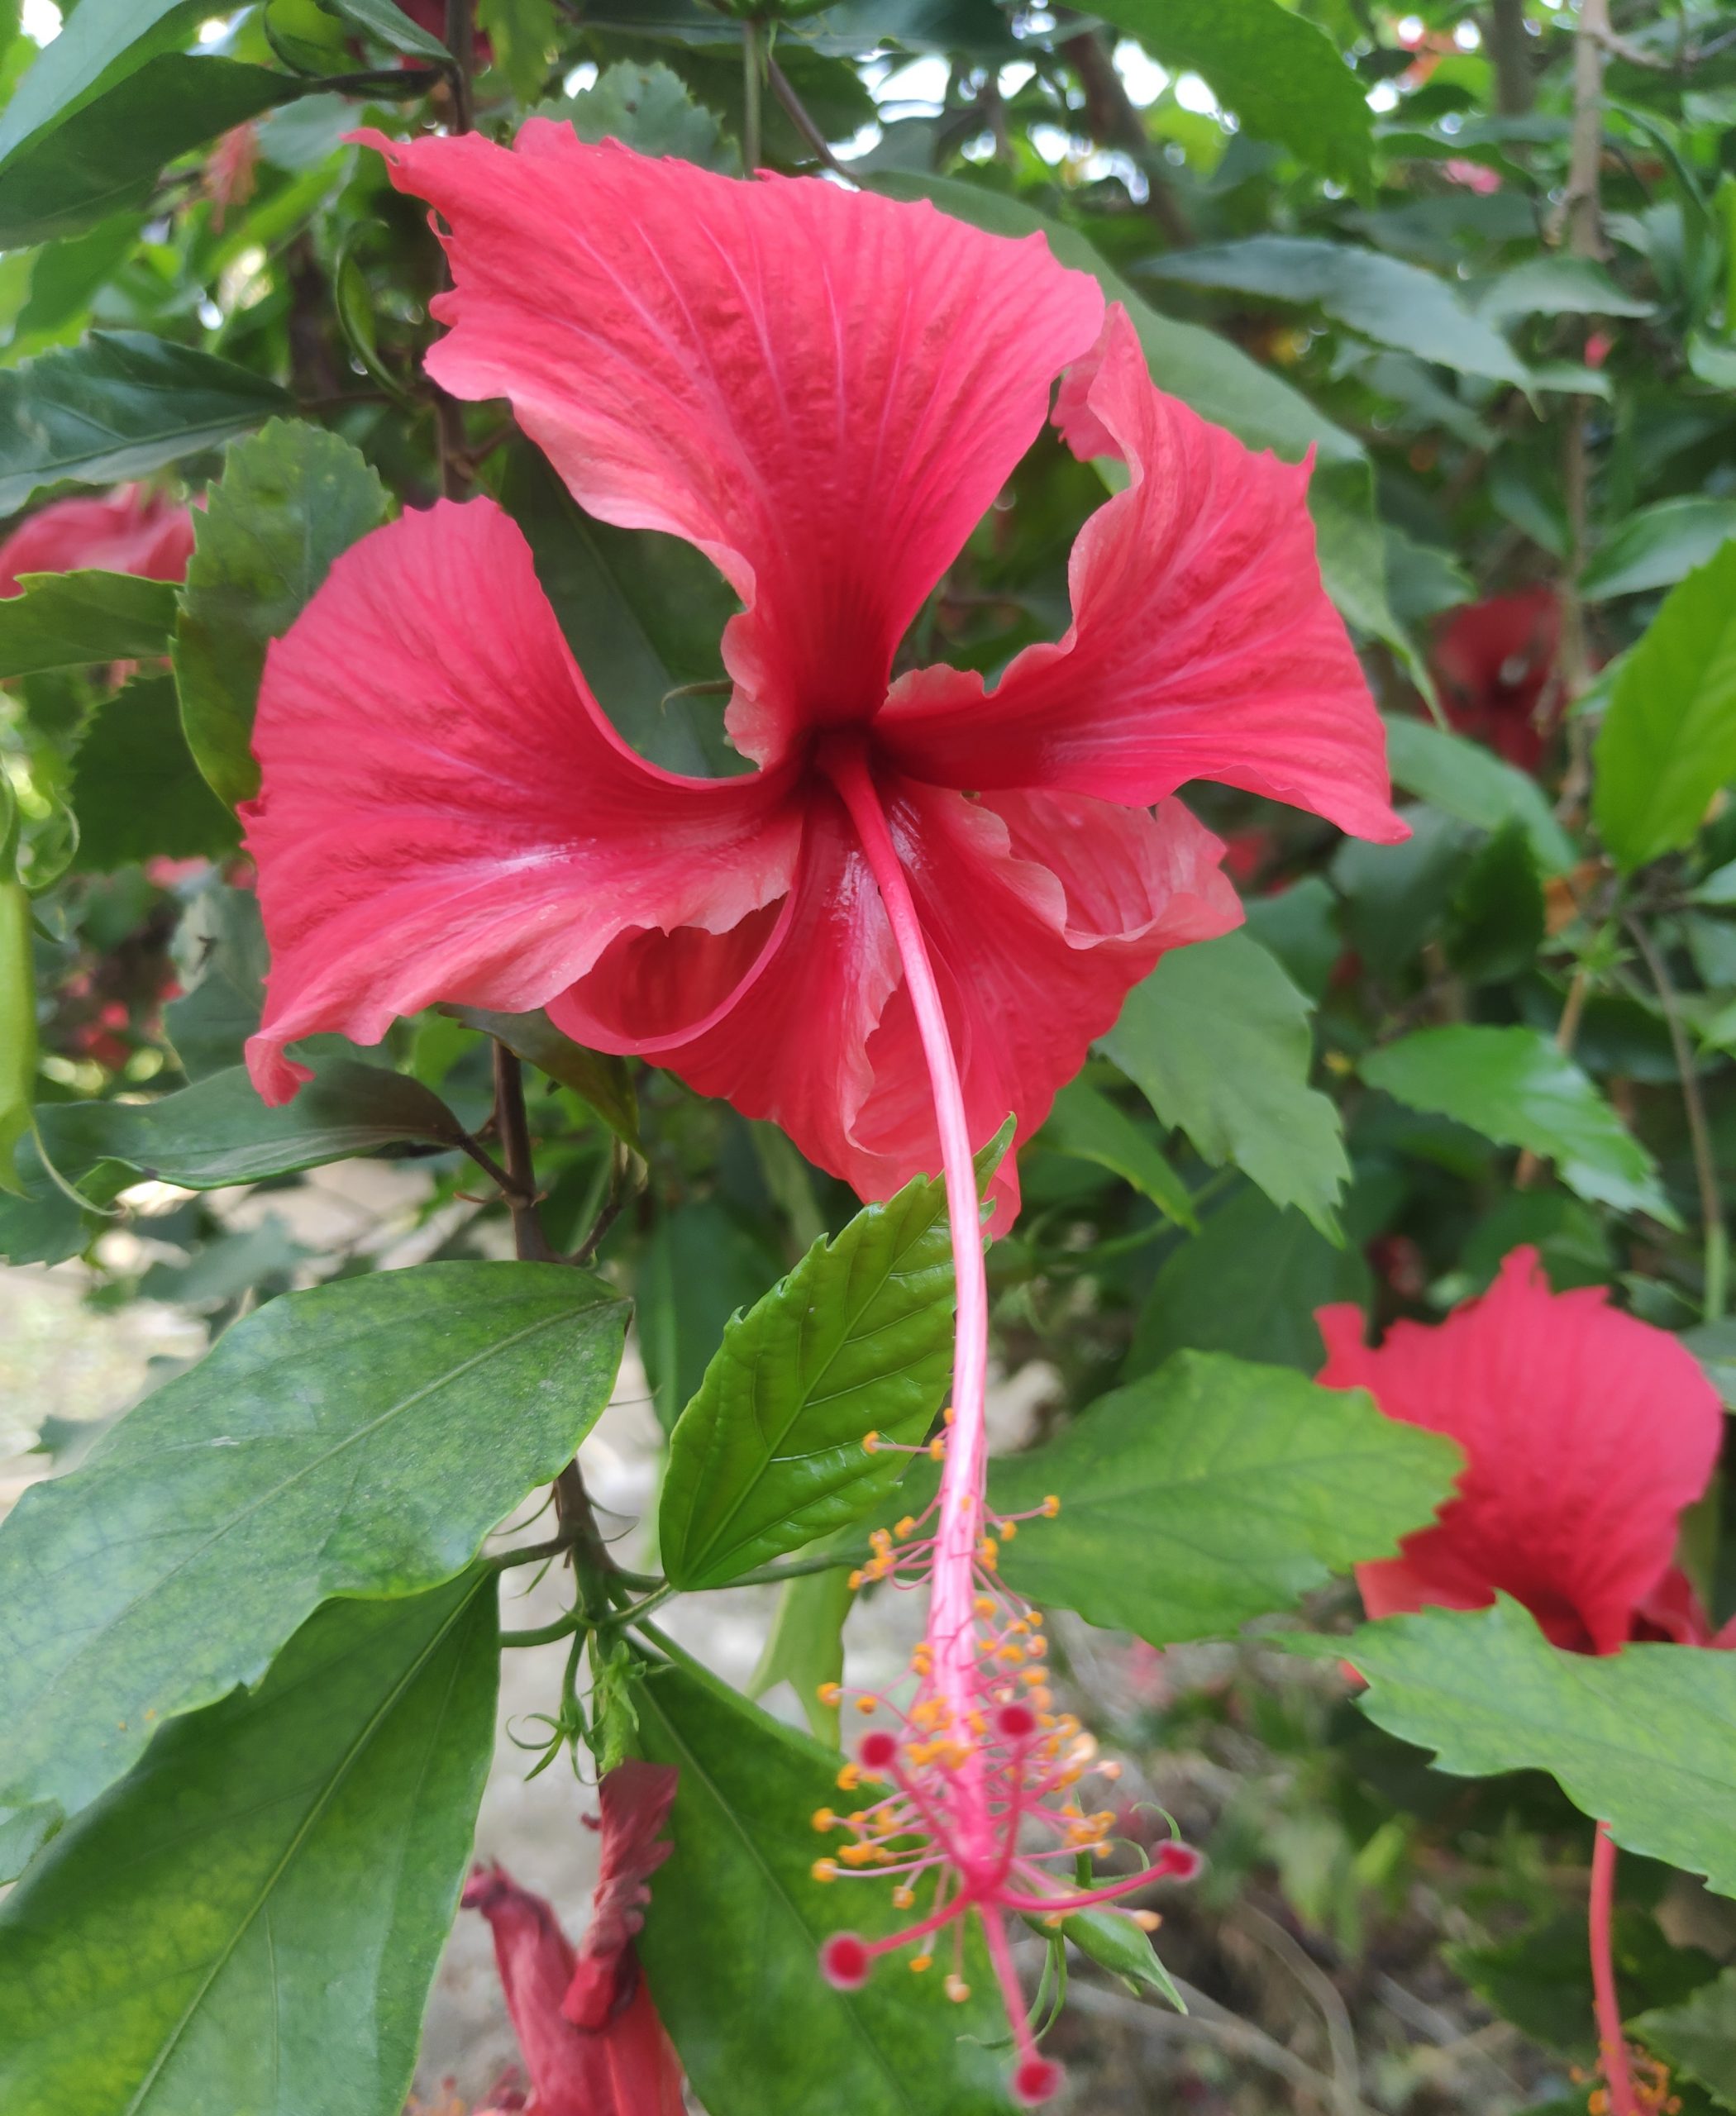 Blooming Red Hibiscus